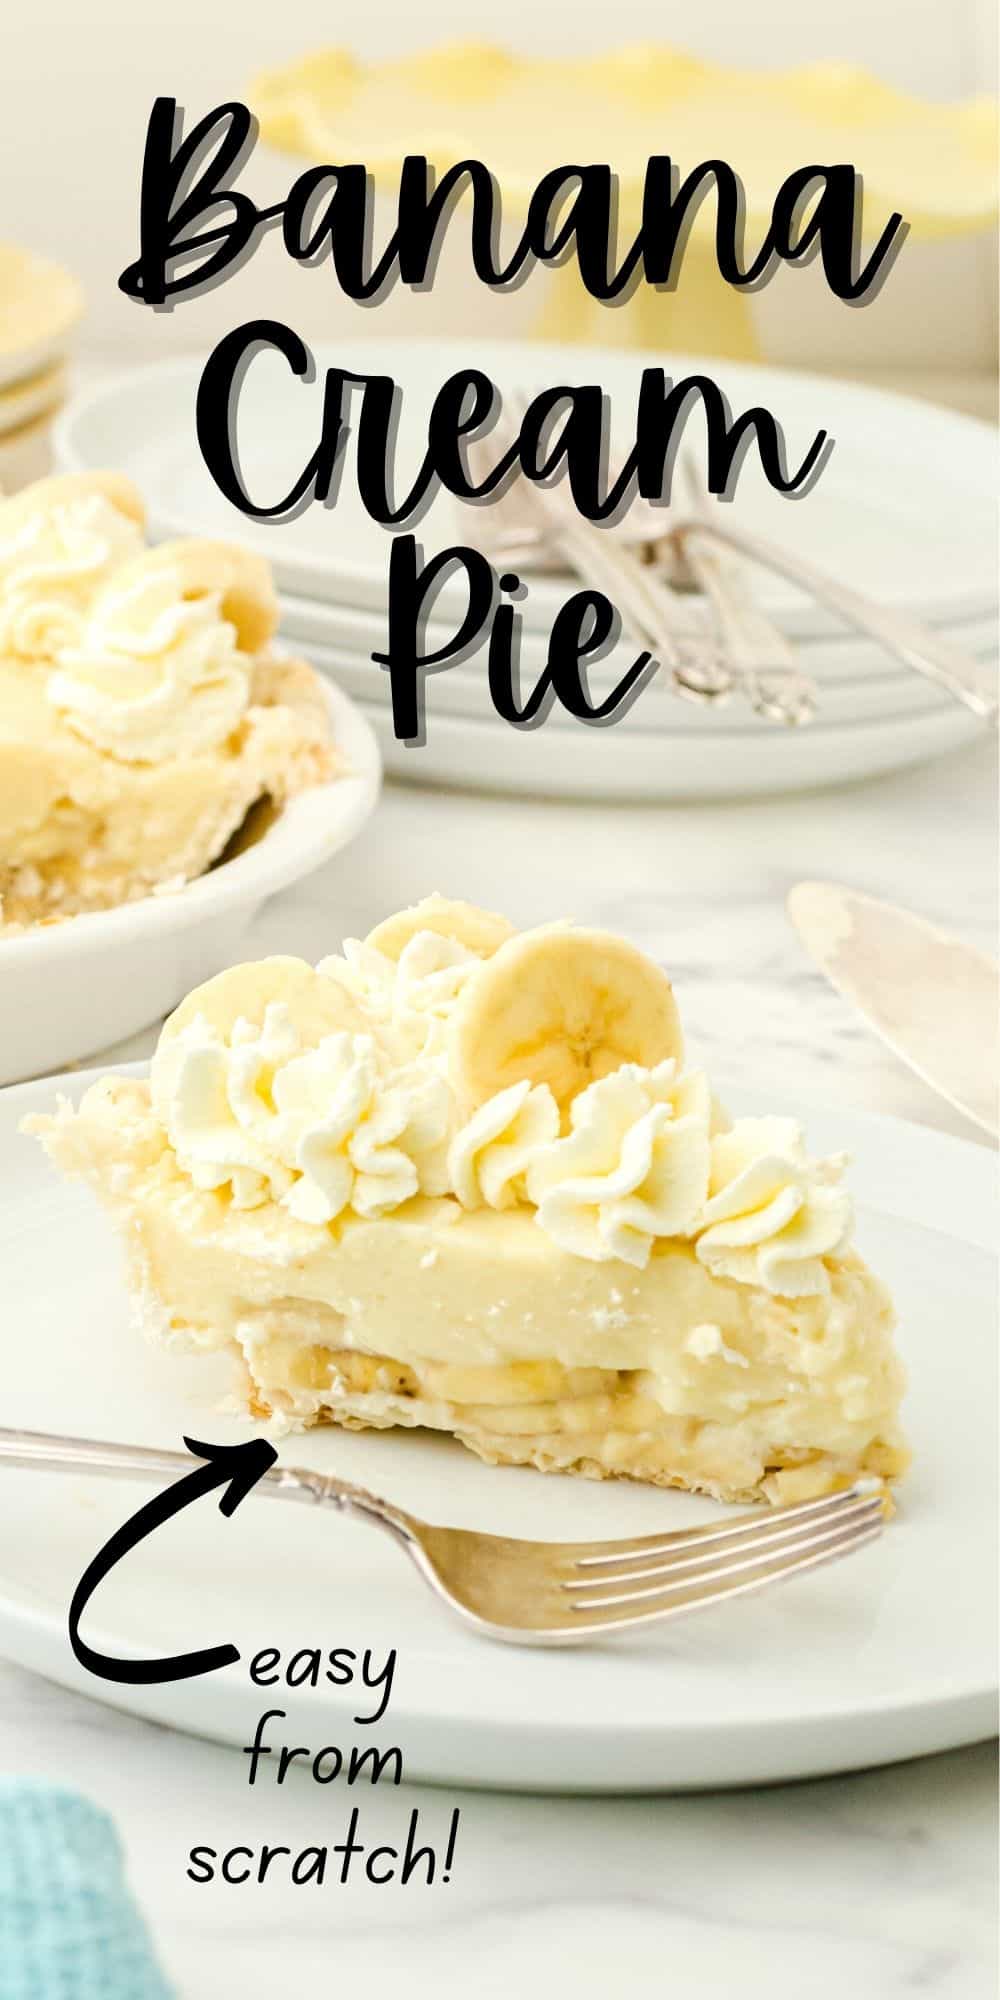 Banana Cream Pie with pudding - also known as banana pudding pie- on a plate with a fork